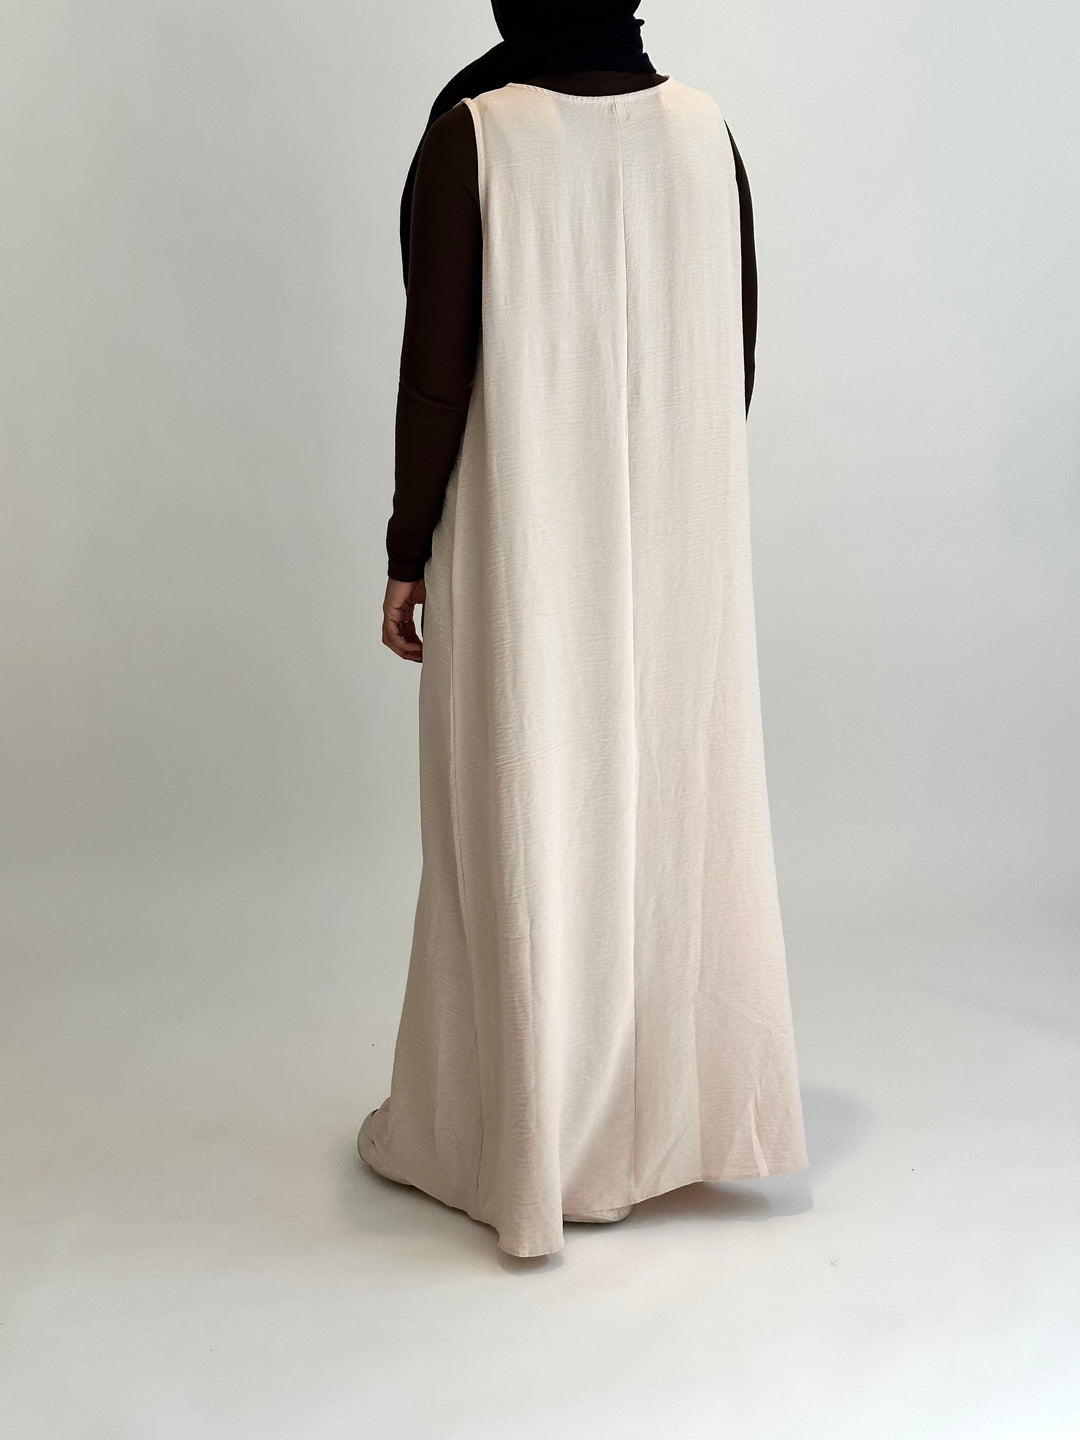 Get trendy with Mariya 2-piece Jilbab - Beige -  available at Voilee NY. Grab yours for $34.99 today!